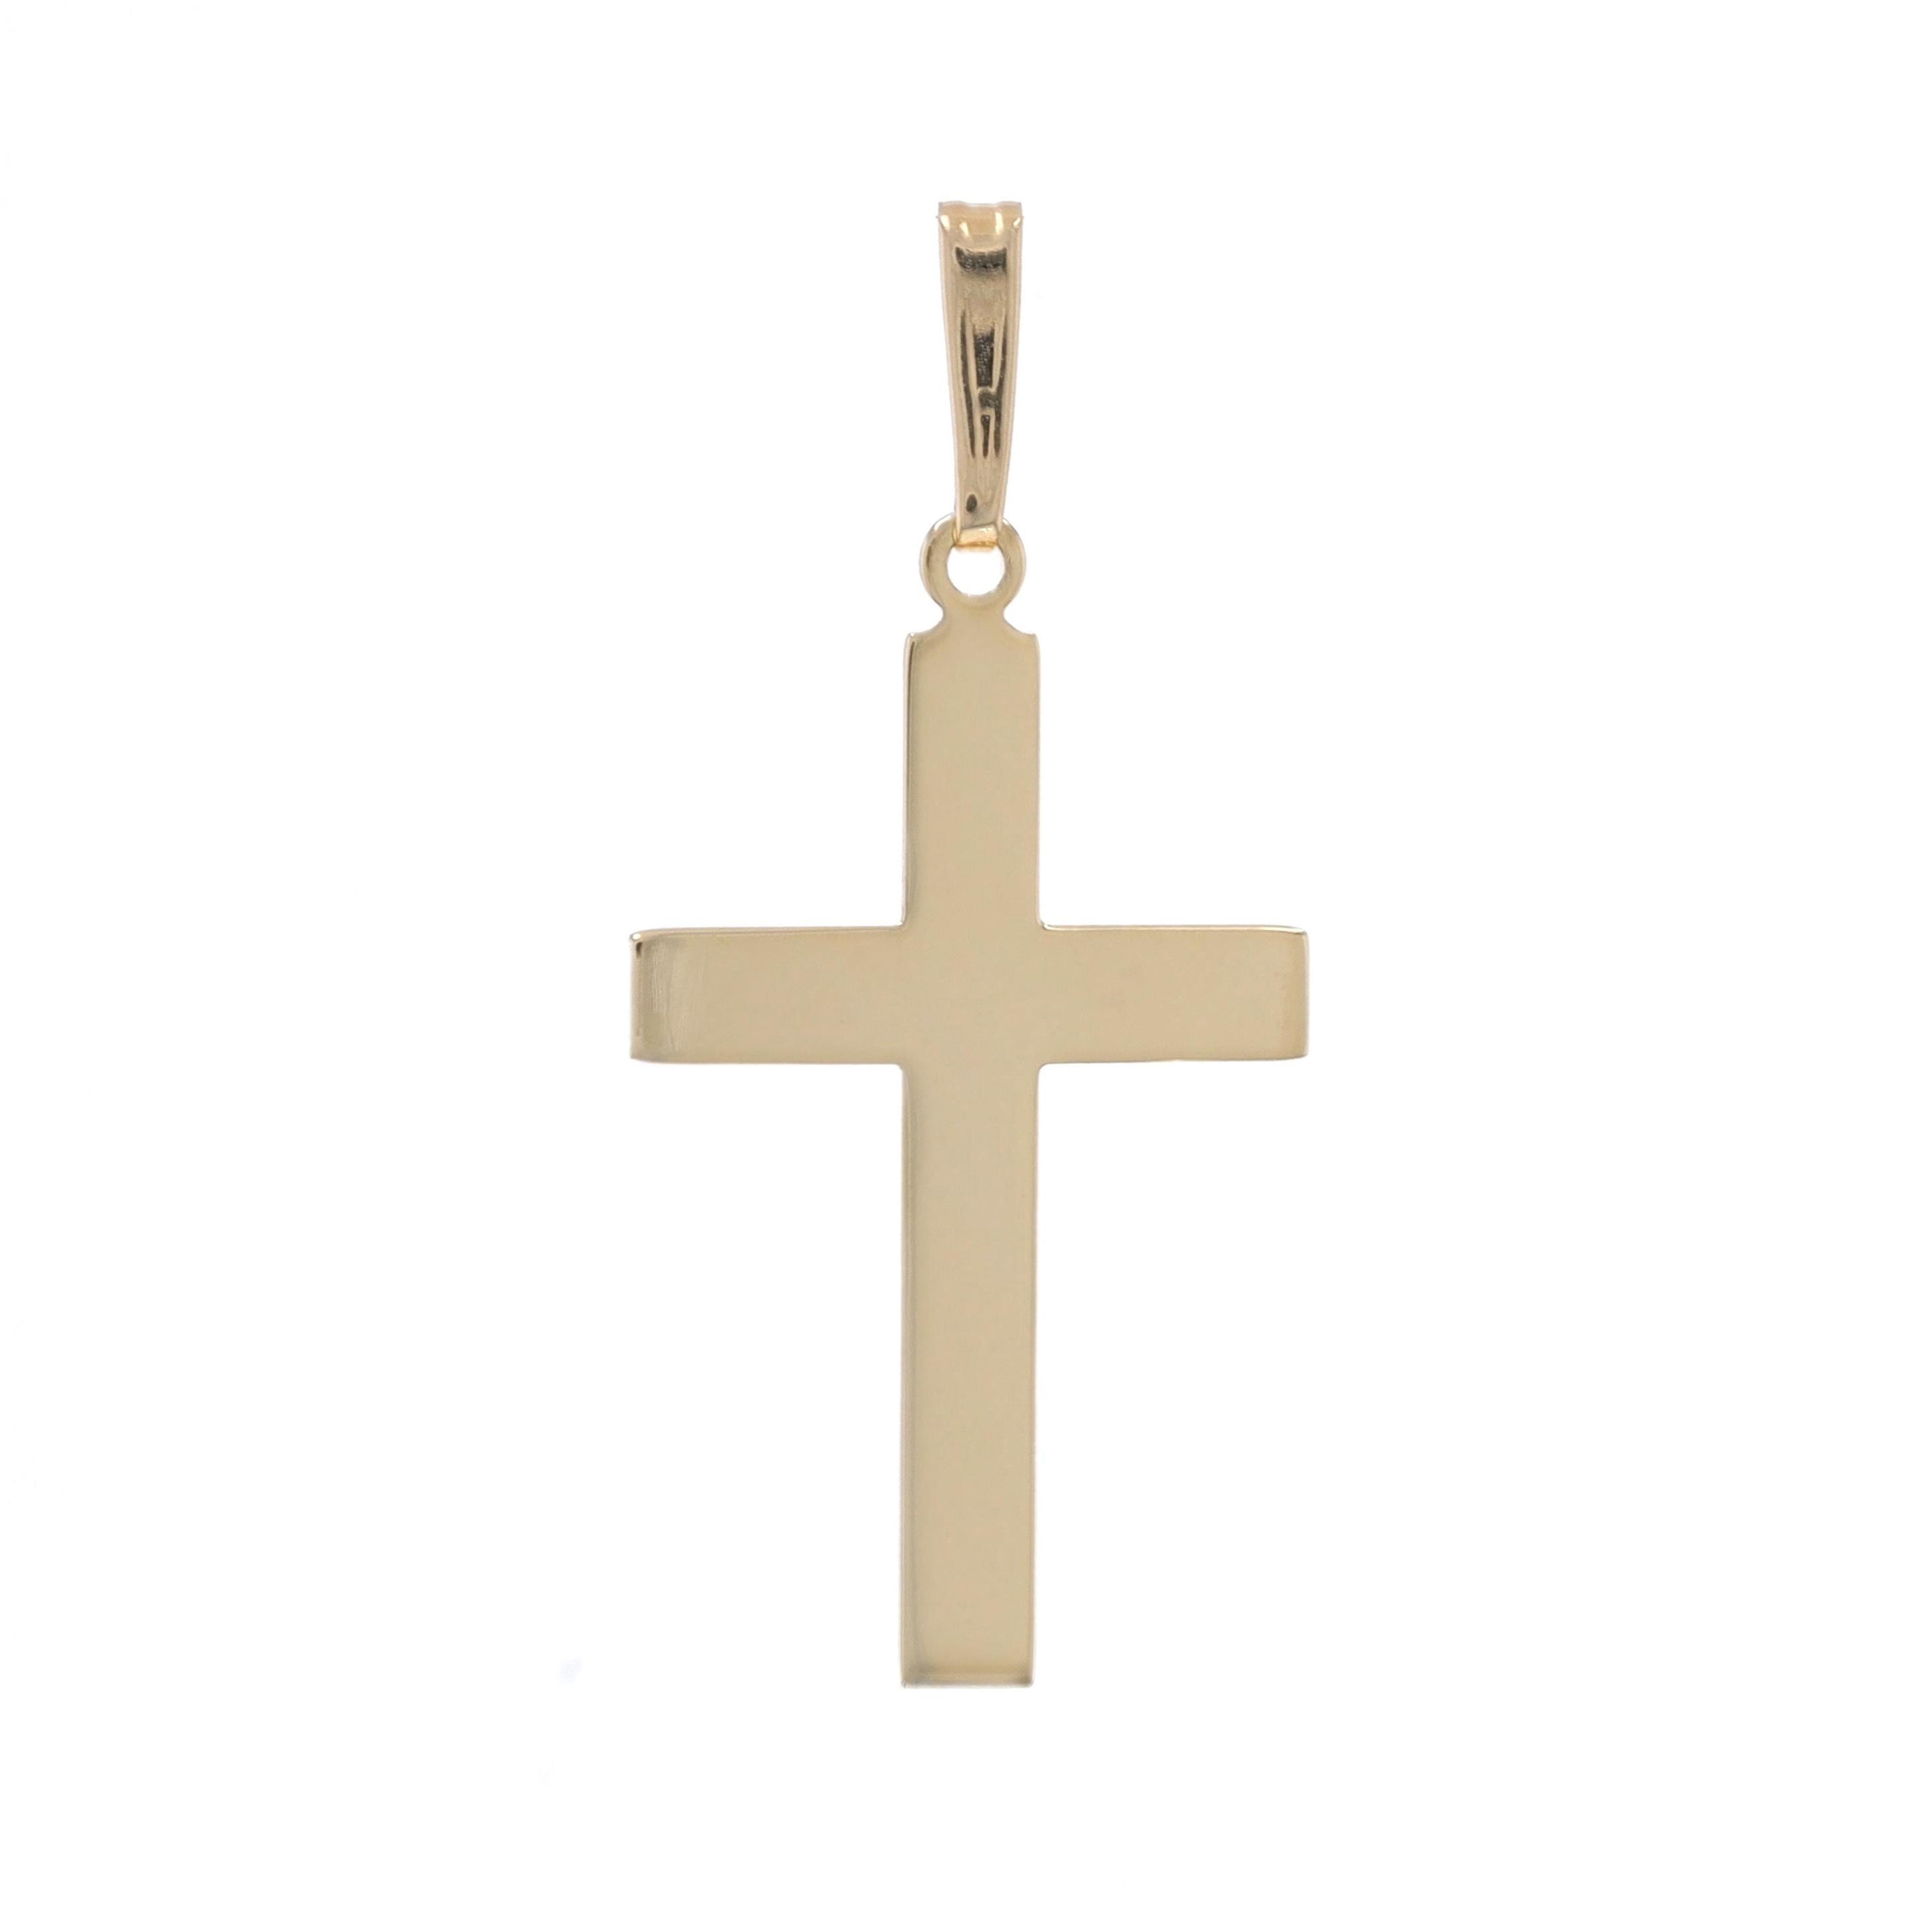 Metal Content: 14k Yellow Gold

Theme: Cross, Faith

Measurements

Tall (from stationary bail): 1 7/32